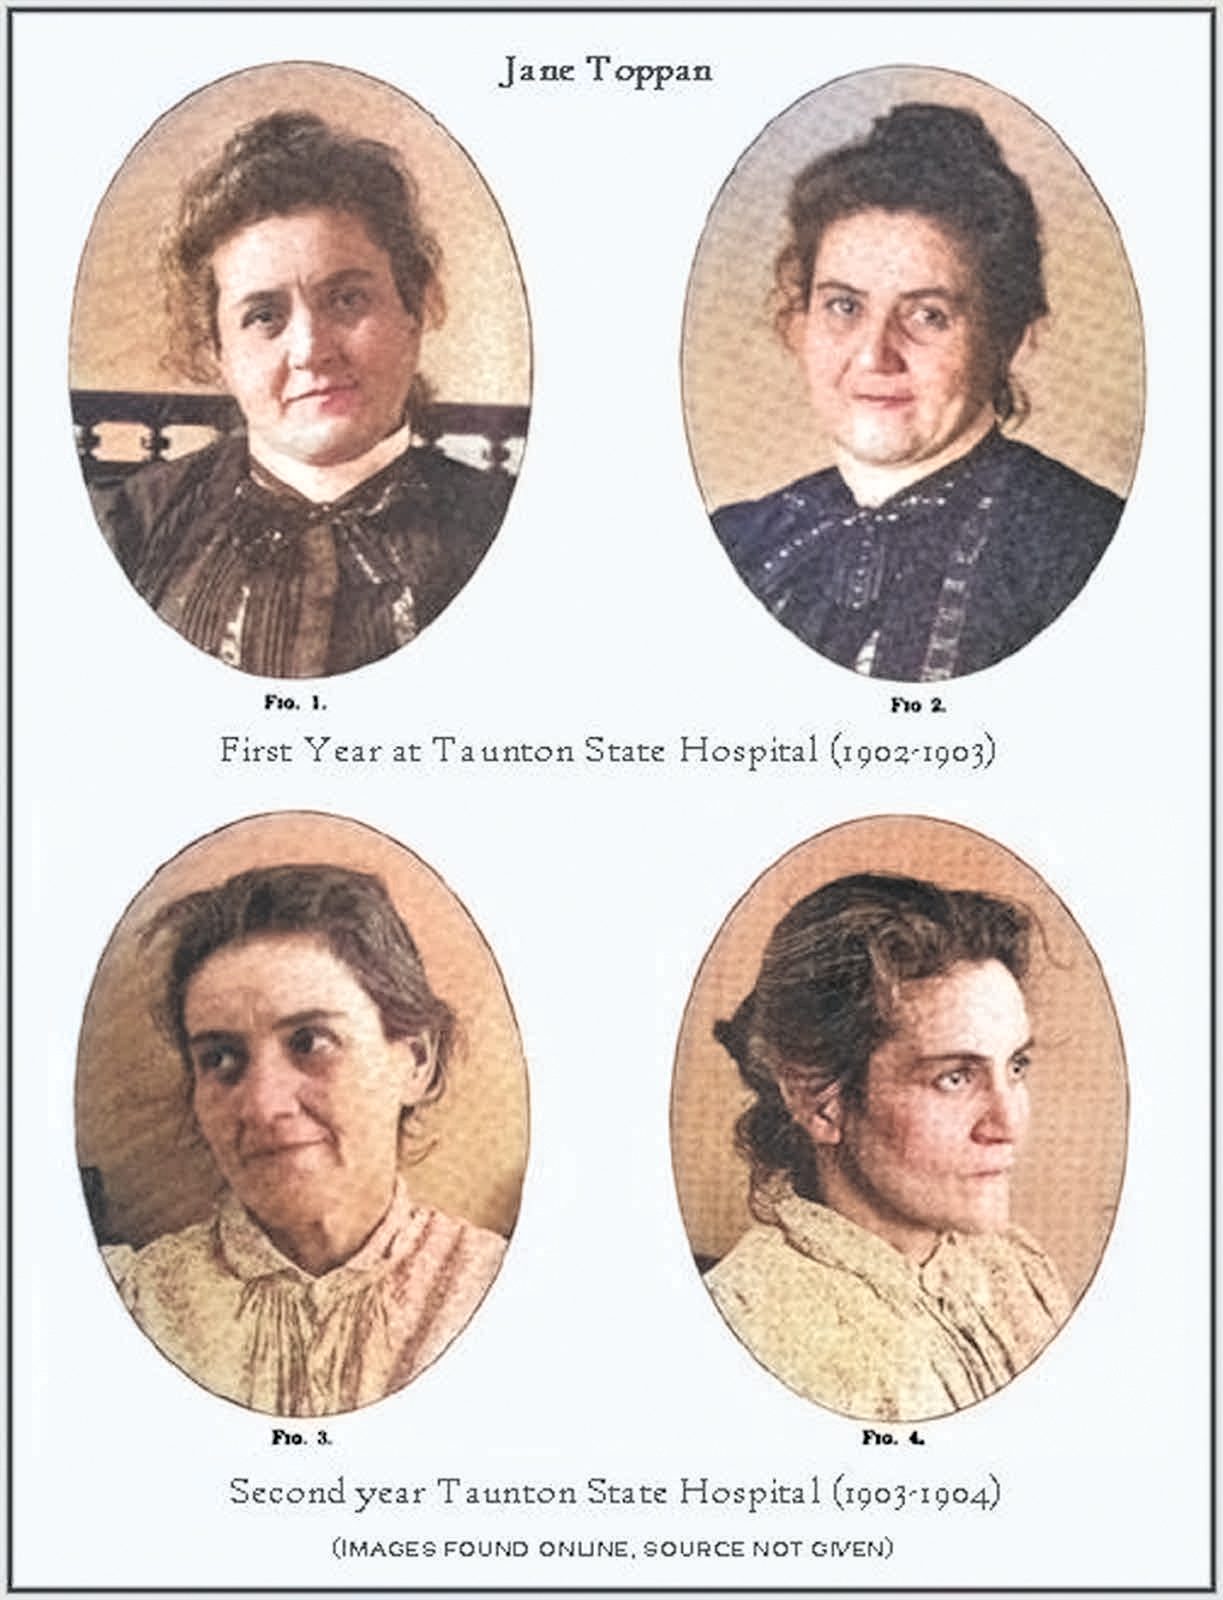 A collage of portraits of Jane Toppan as a psychiatric hospital, she has unruly hair a neutral expression on her face in all four photos.